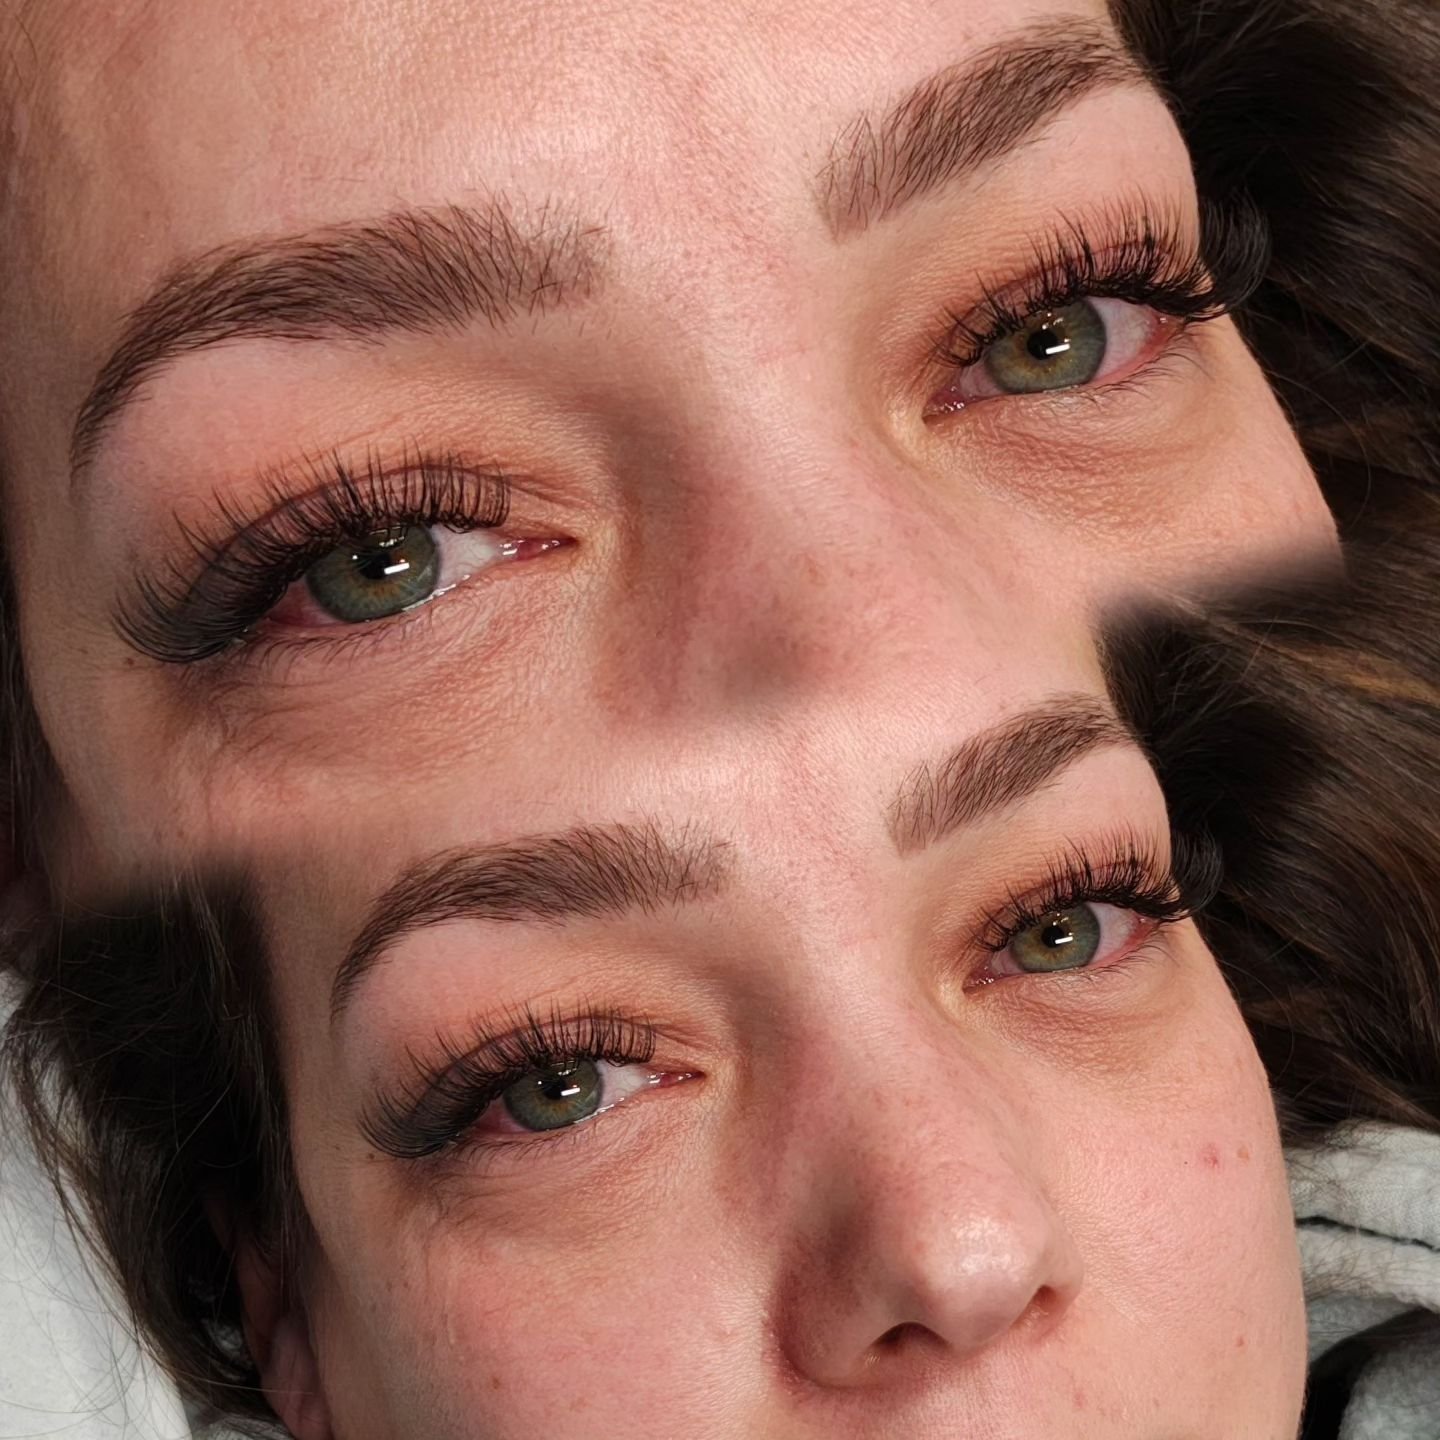 ITS IN HER EYES ⚜️✨

⚜️Hair &amp; Lash Extension Technician
⚜️Injector
⚜️Complications Trained
📍Cardiff, South Wales

#hybridlashes #hybirdlashgoals
#naturallashes #naturallookinglashes
#naturallashextensions
 #volumelashes #uklashes
#manchesterlash